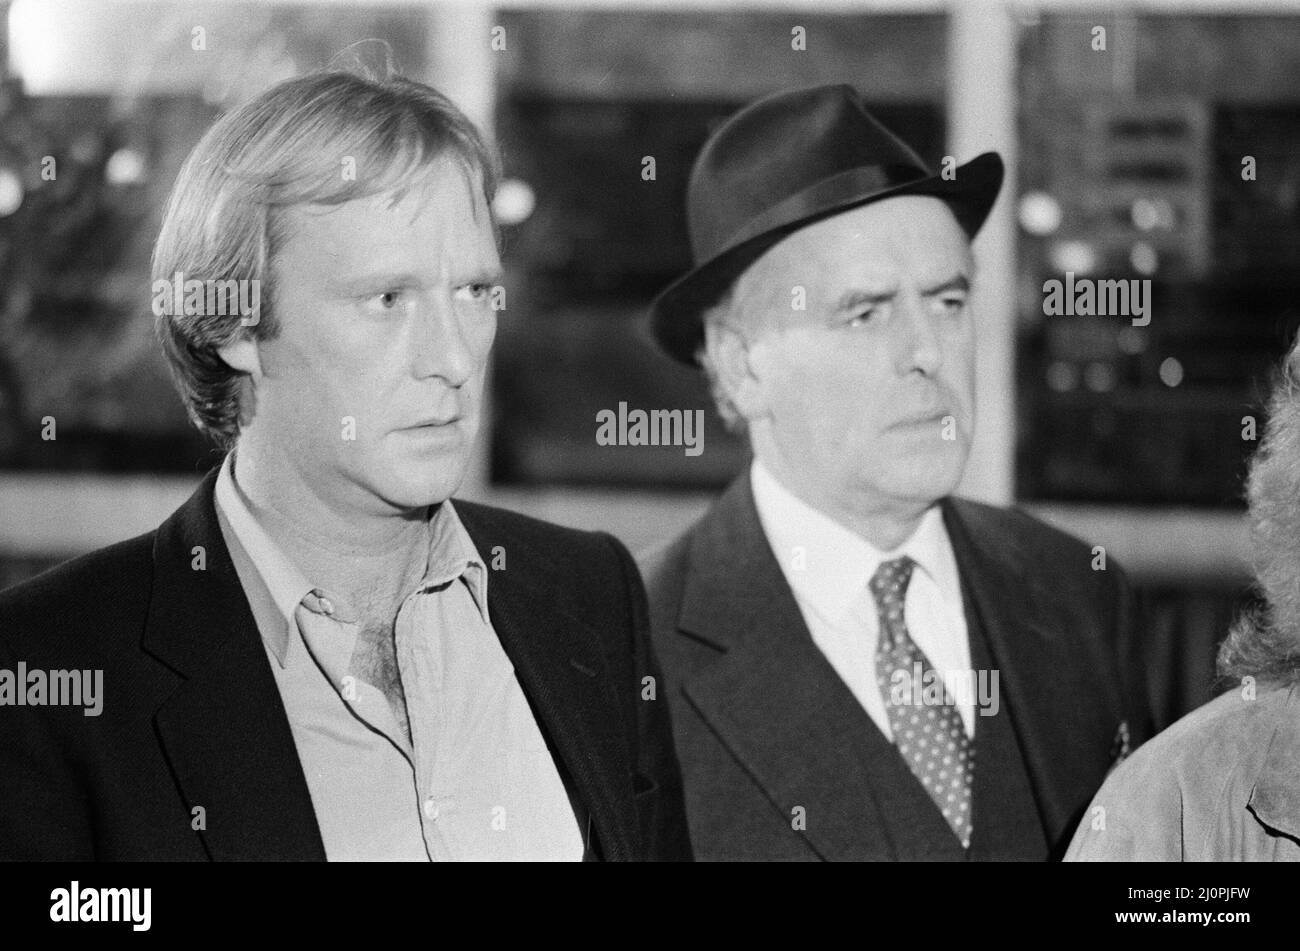 Behind the scenes filming of Minder, a British comedy drama TV Series set in the London criminal underworld, fourth series, episode 'A Star is Gorn', pictured Thursday 22nd September 1983. Our Picture Shows ... George Cole (right) as Arthur Daley and Dennis Waterman as Terry McCann. Stock Photo